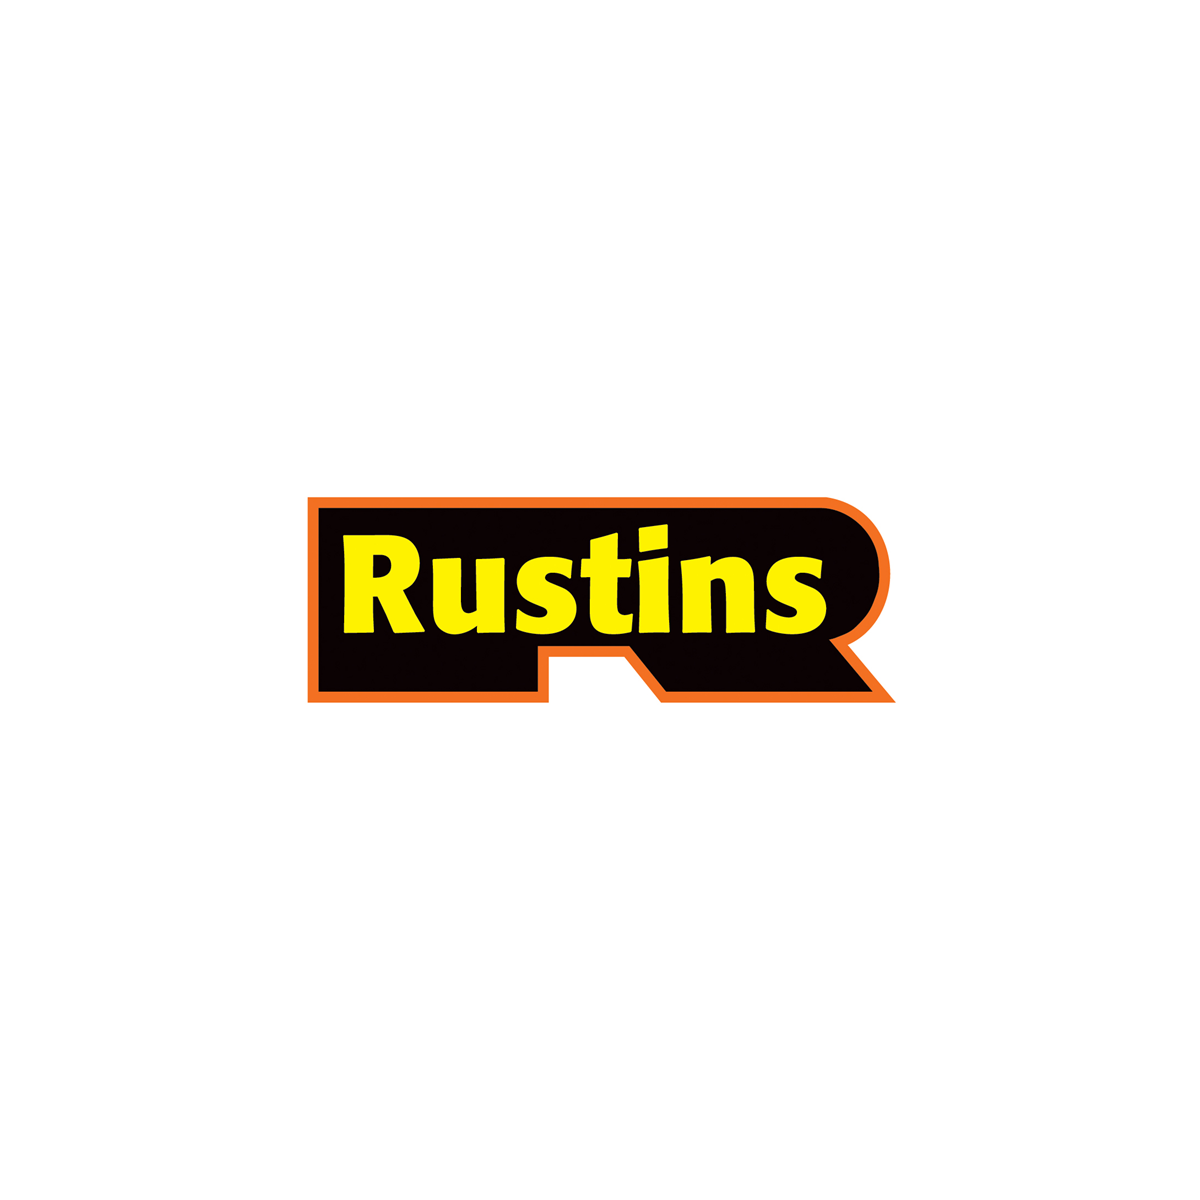 Where to buy Rustins Products.